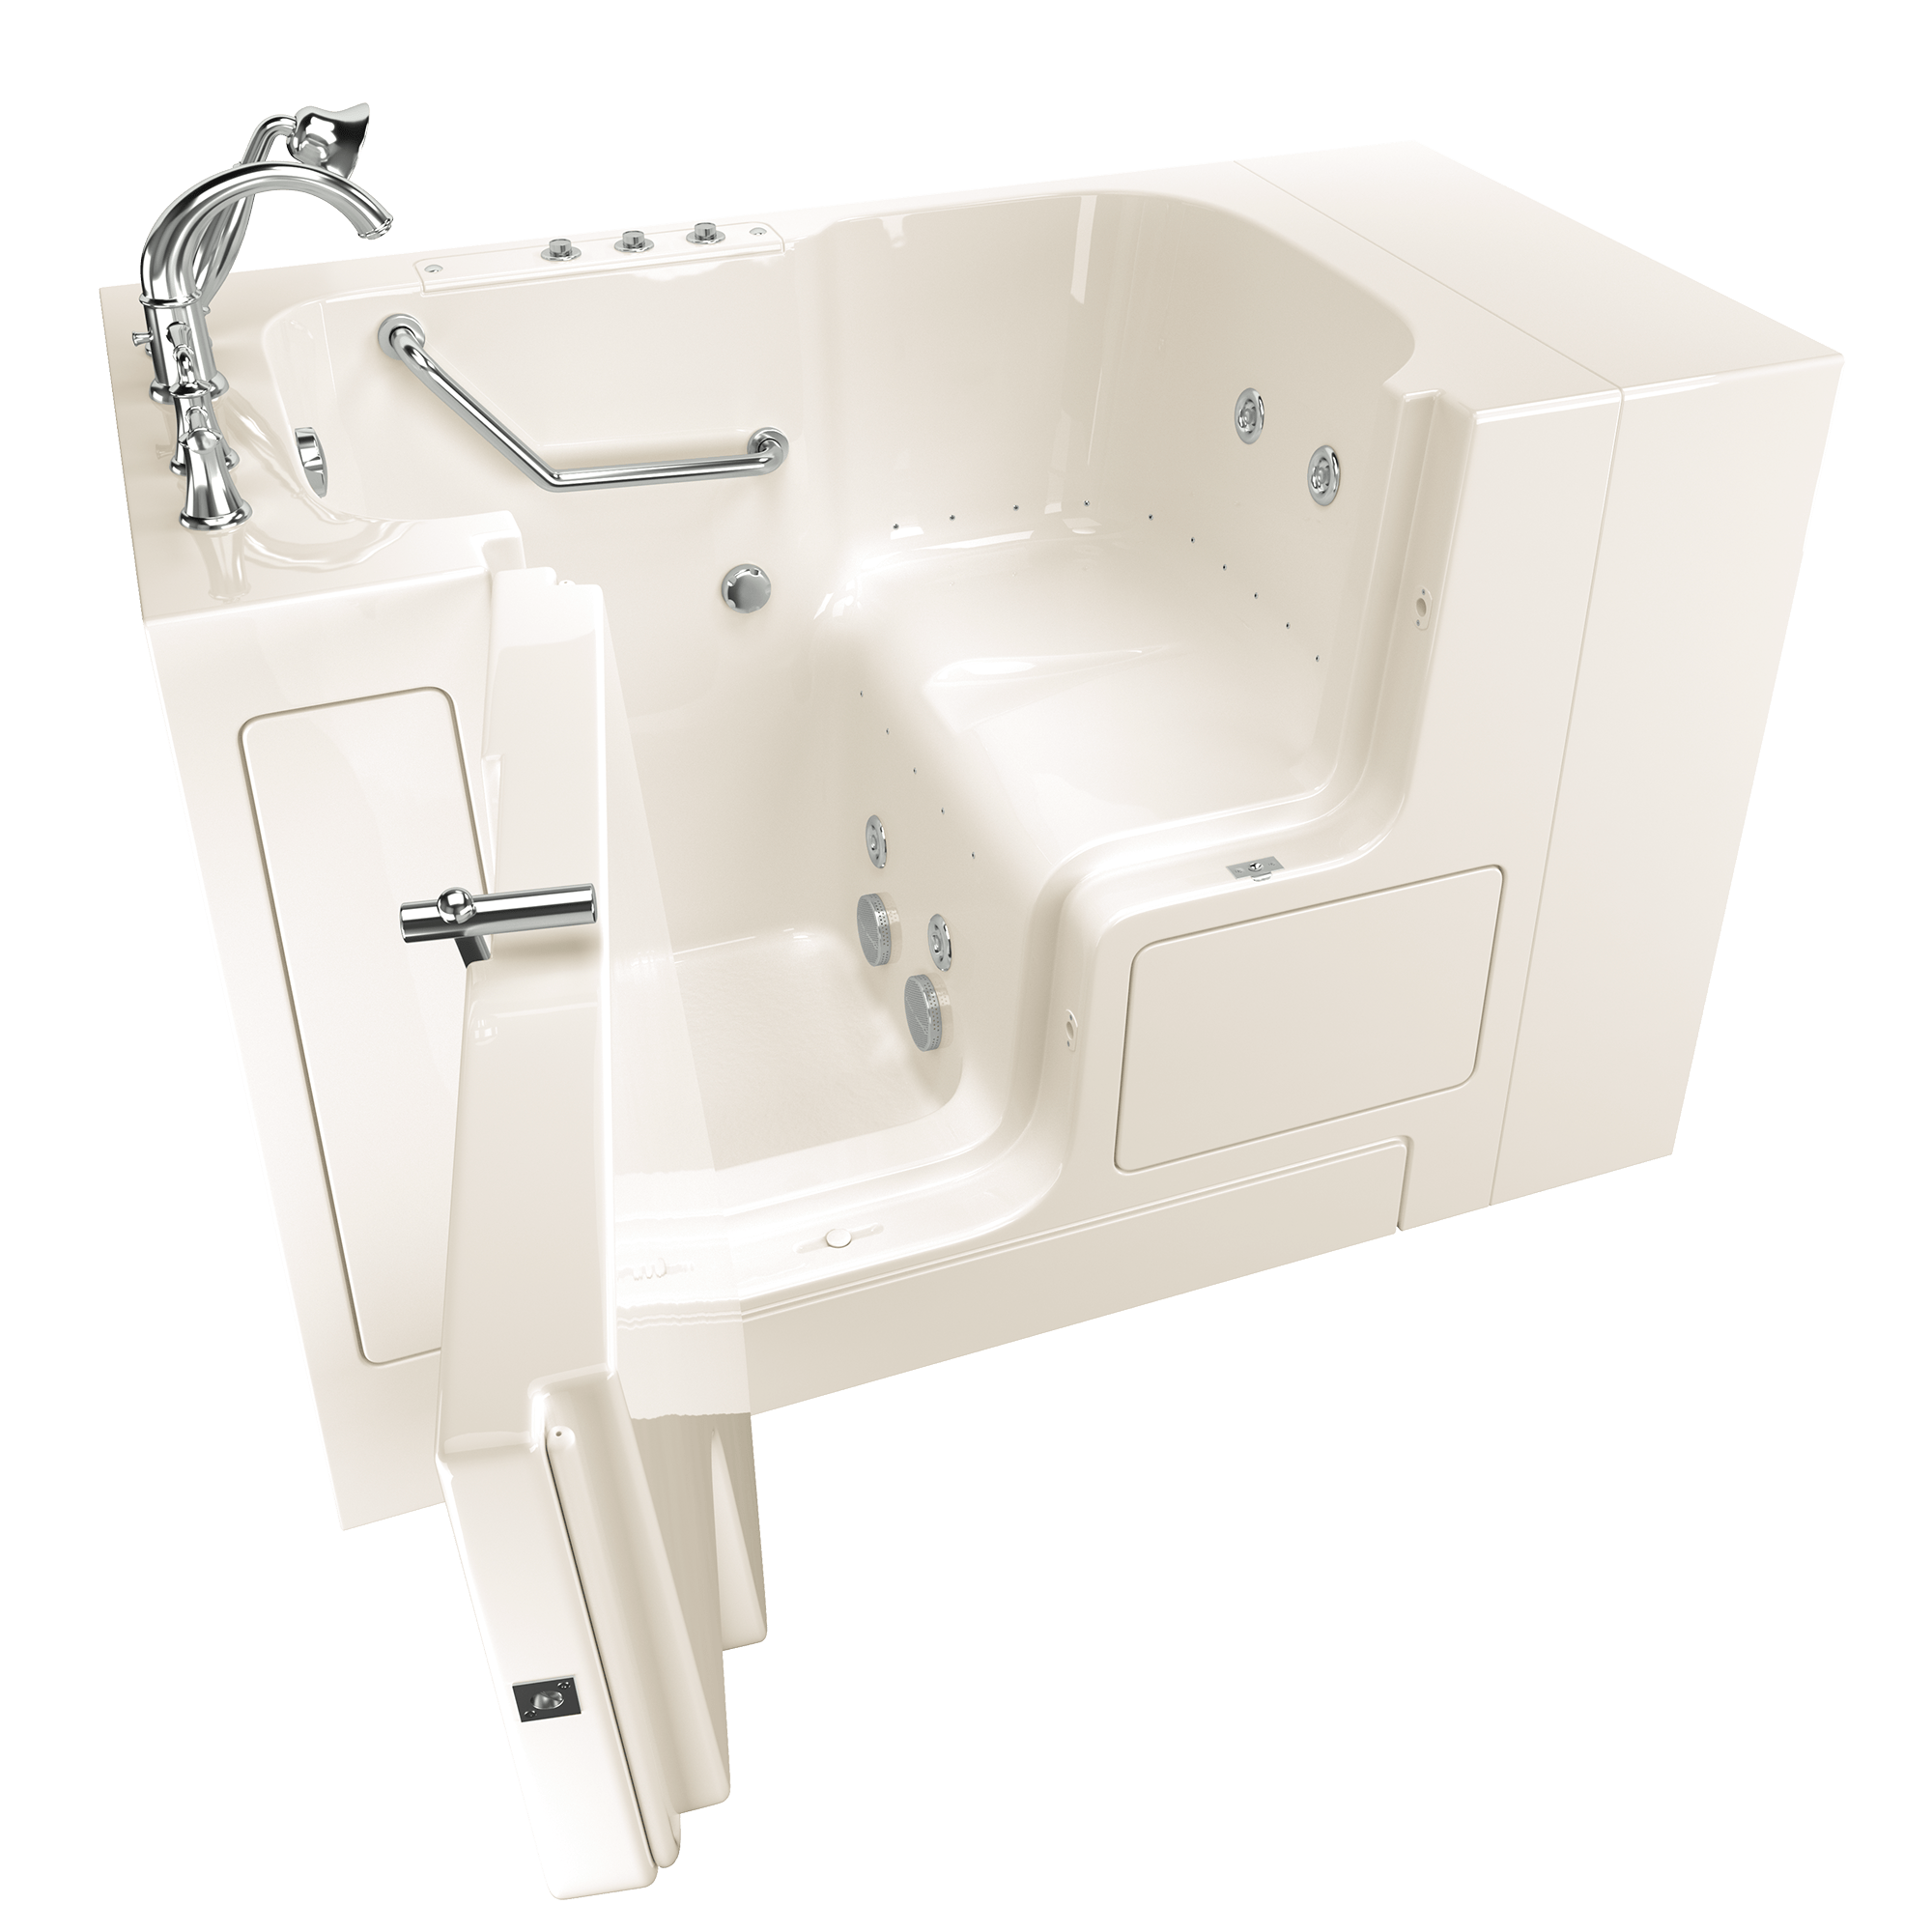 Gelcoat Value Series 32 x 52 -Inch Walk-in Tub With Combination Air Spa and Whirlpool Systems - Left-Hand Drain With Faucet